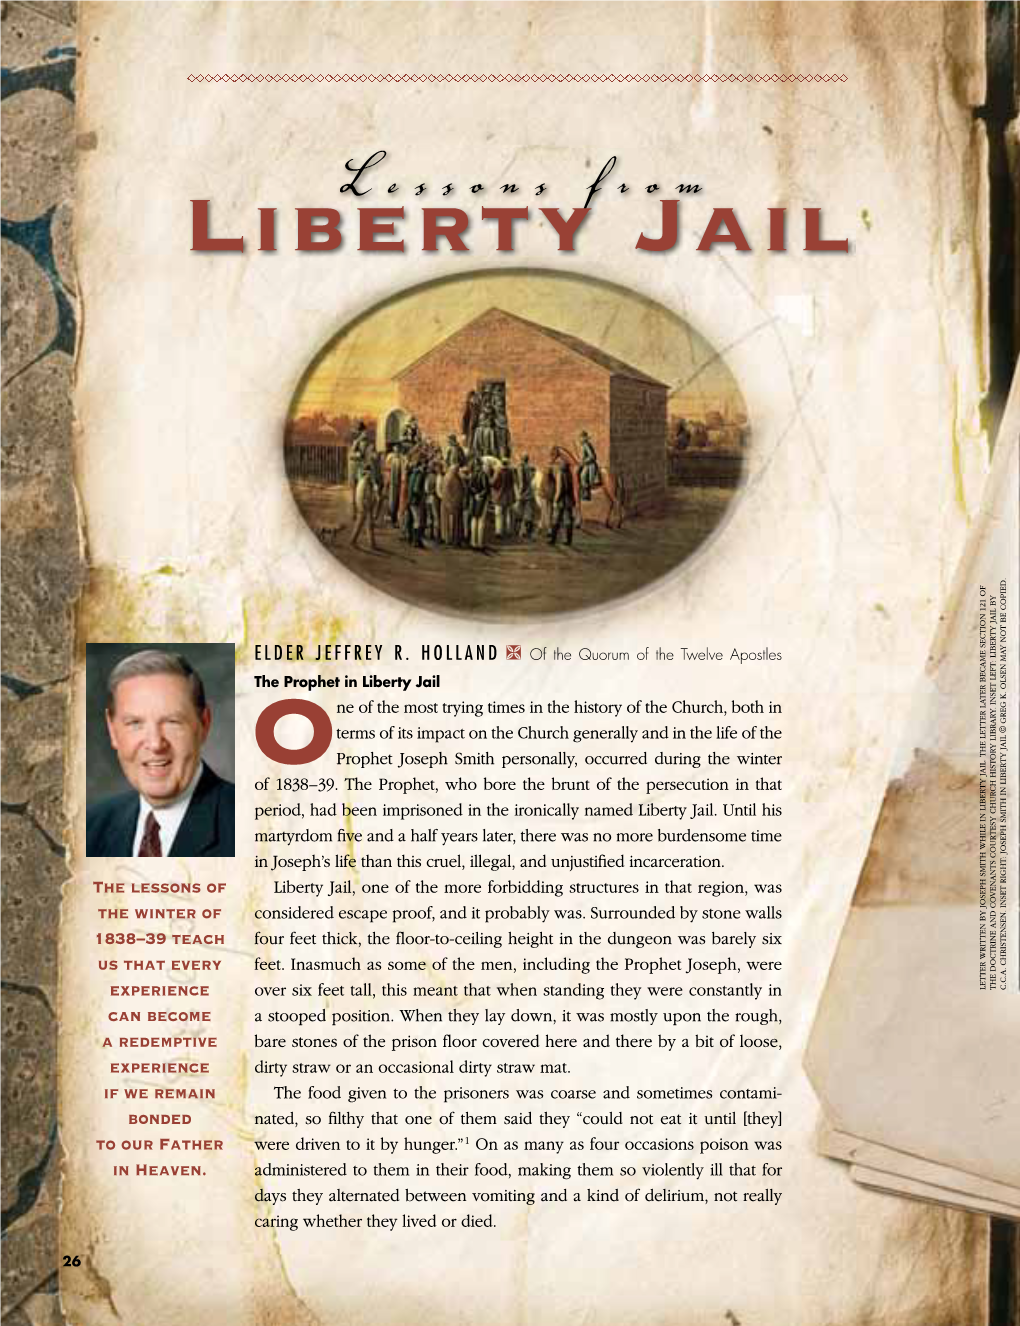 Lessons from Liberty Jail